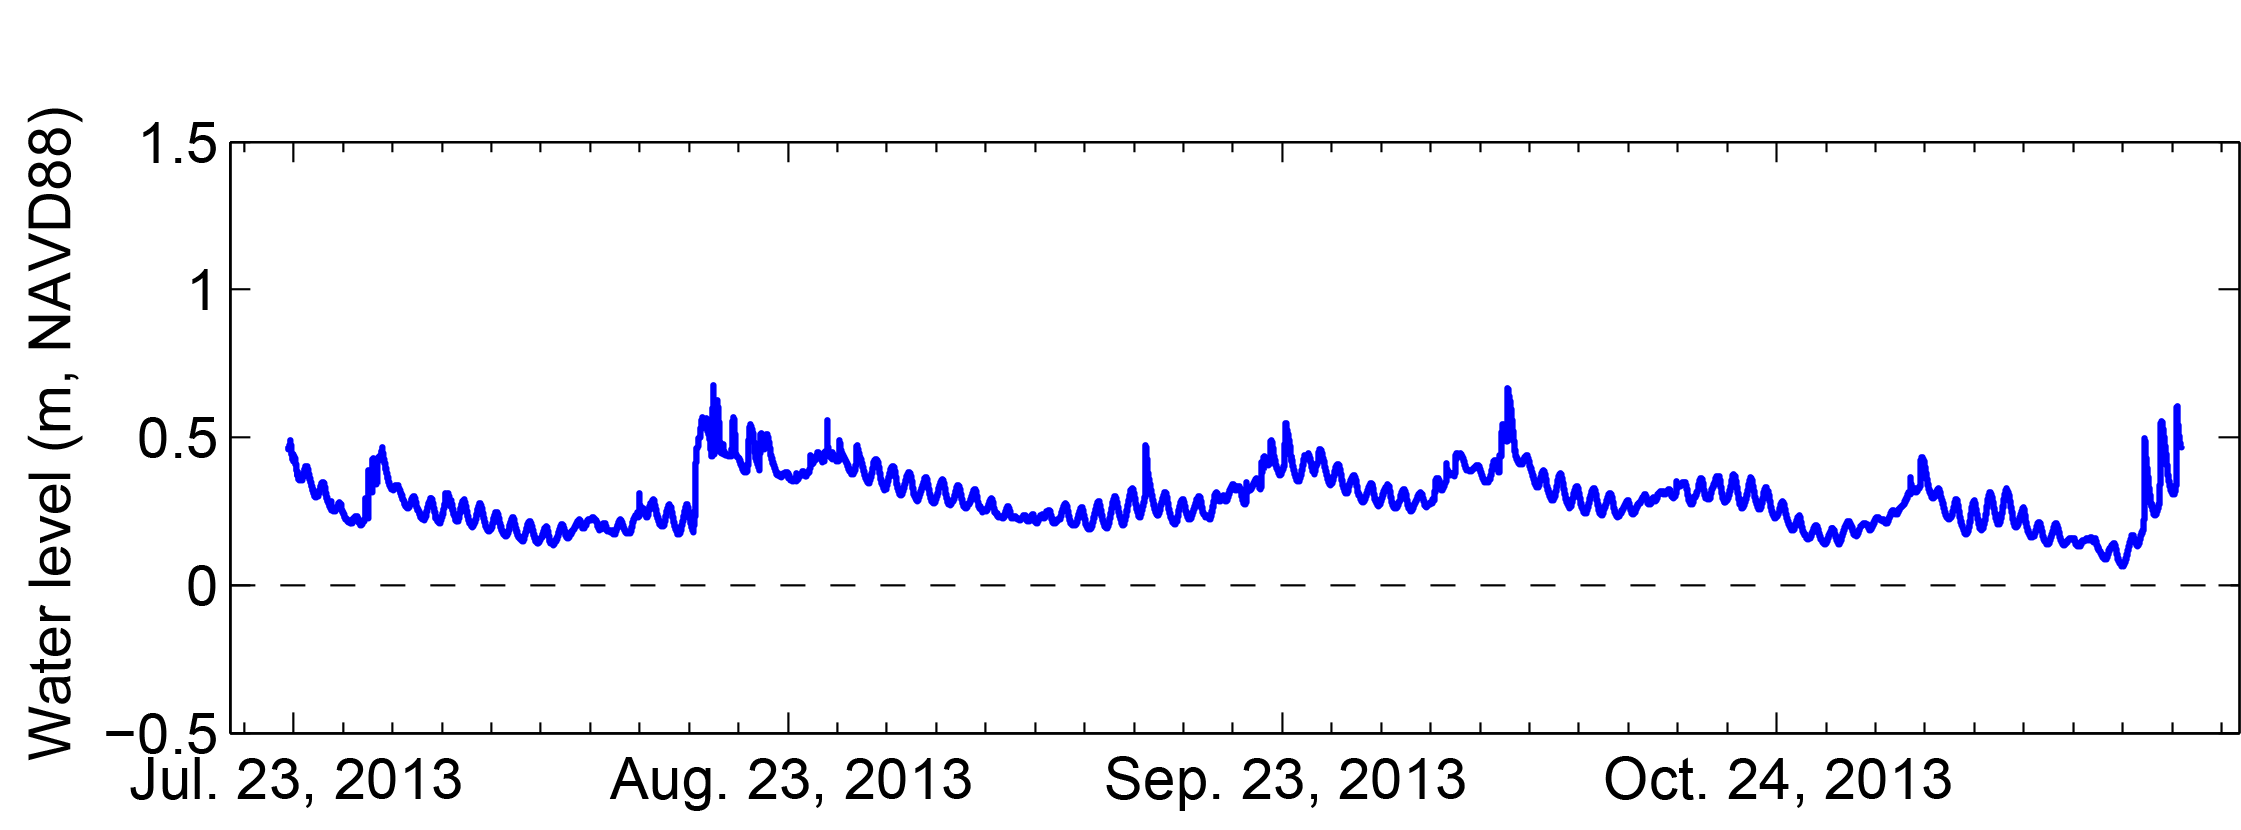 Water-level time series from an RBR DR1060 pressure logger mounted in a buried well at site 966 on Dauphin Island, Alabama, in 2013.